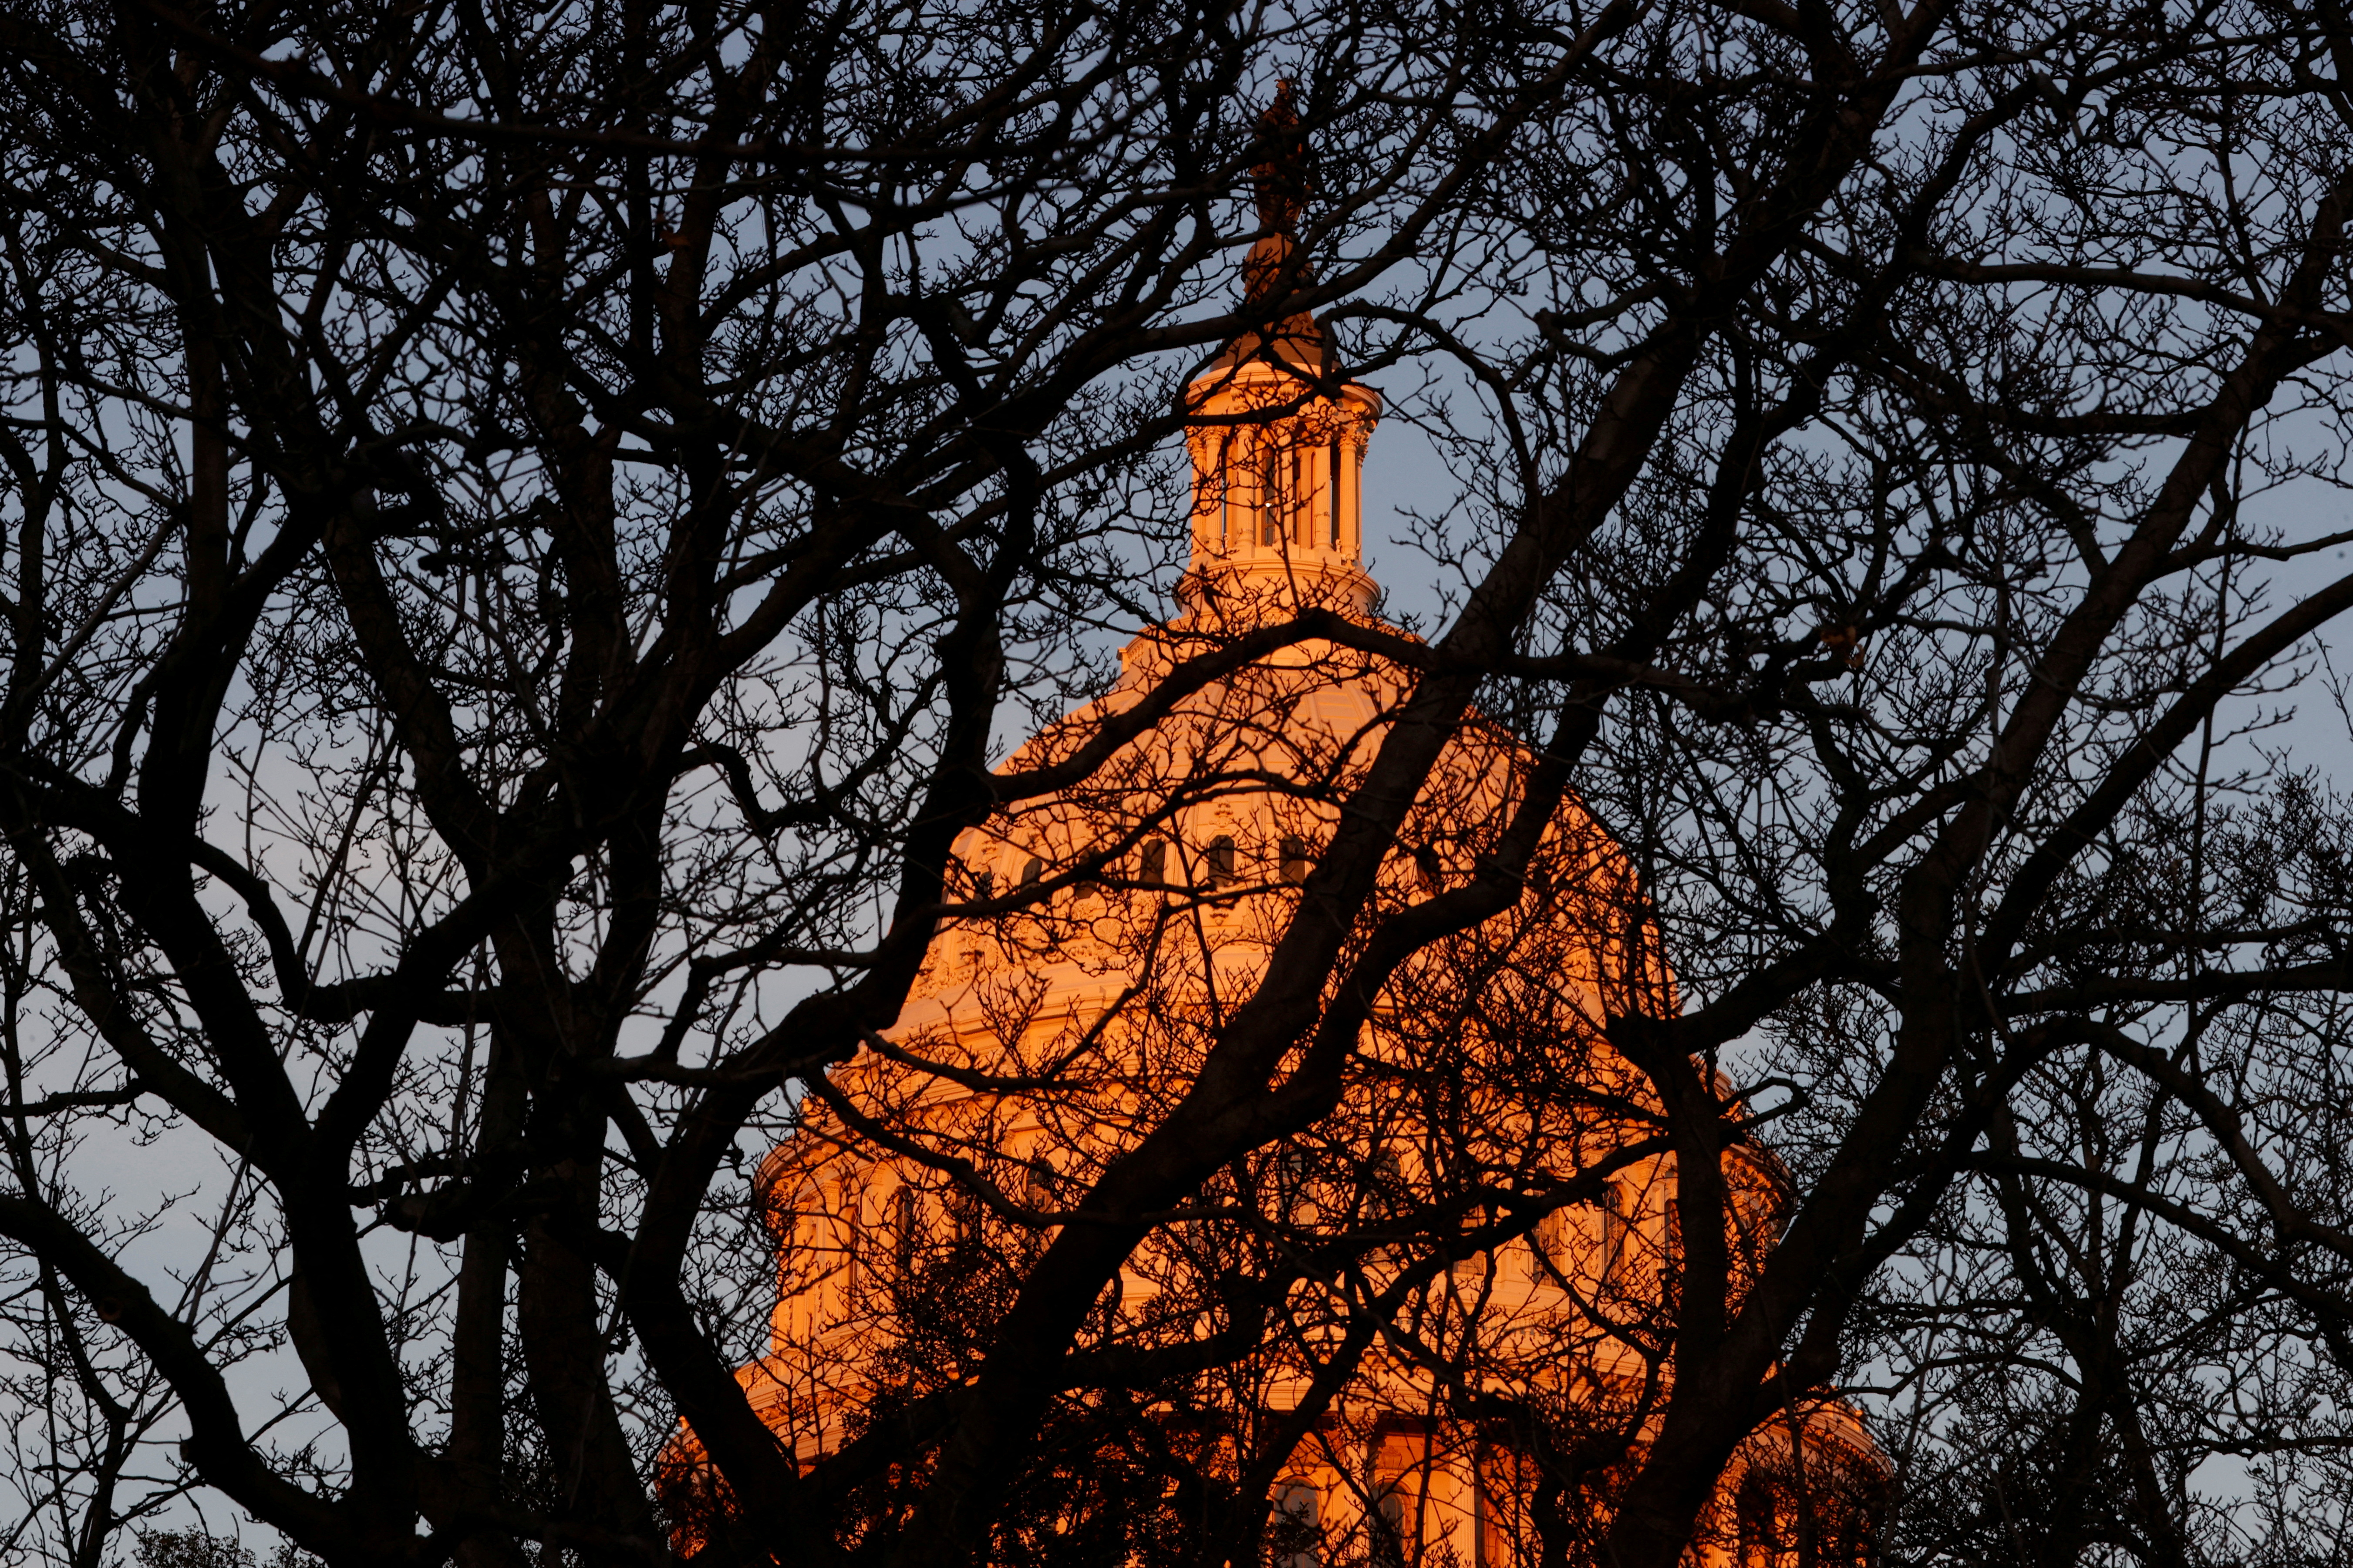 Seen through a thicket of tree branches, the U.S. Capitol dome glows with the sunset in Washington